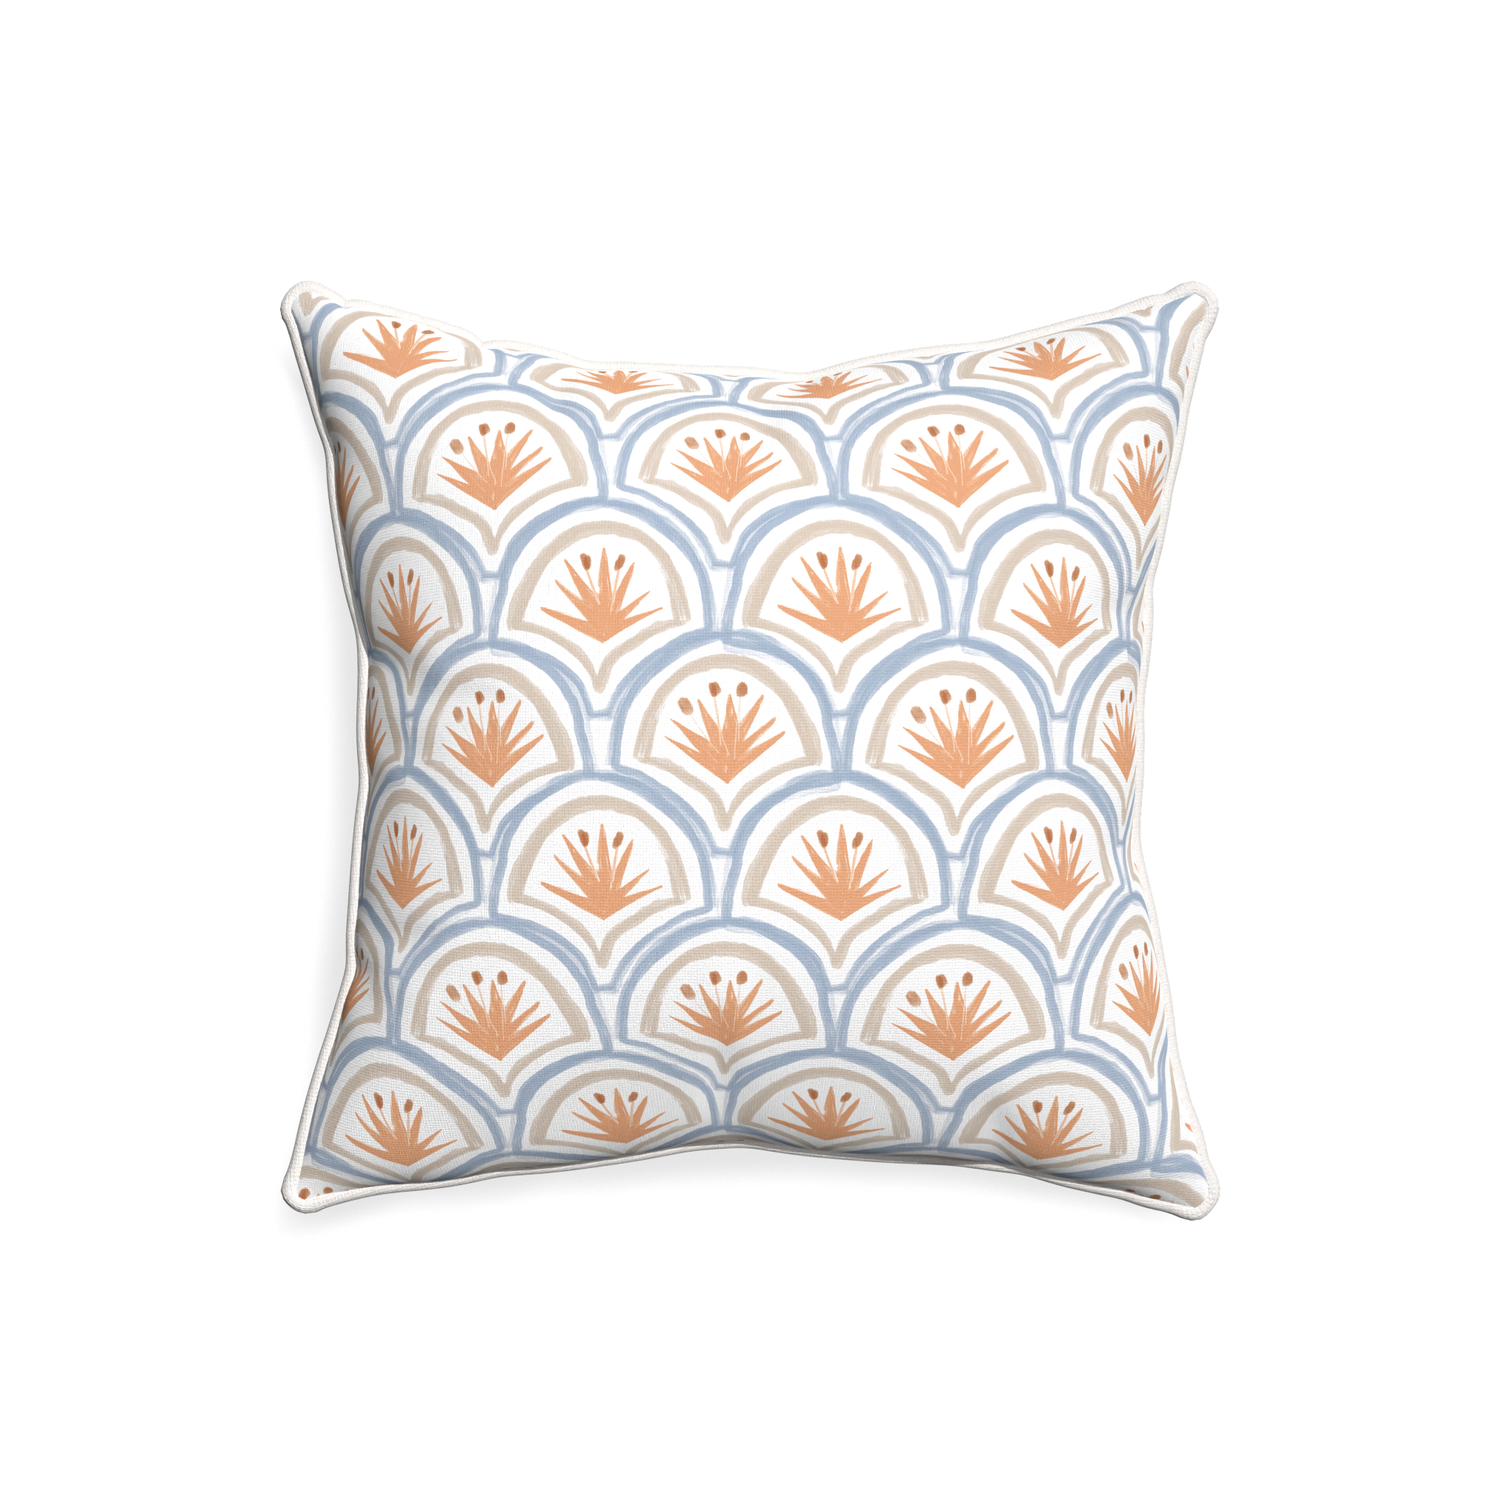 20-square thatcher apricot custom art deco palm patternpillow with snow piping on white background